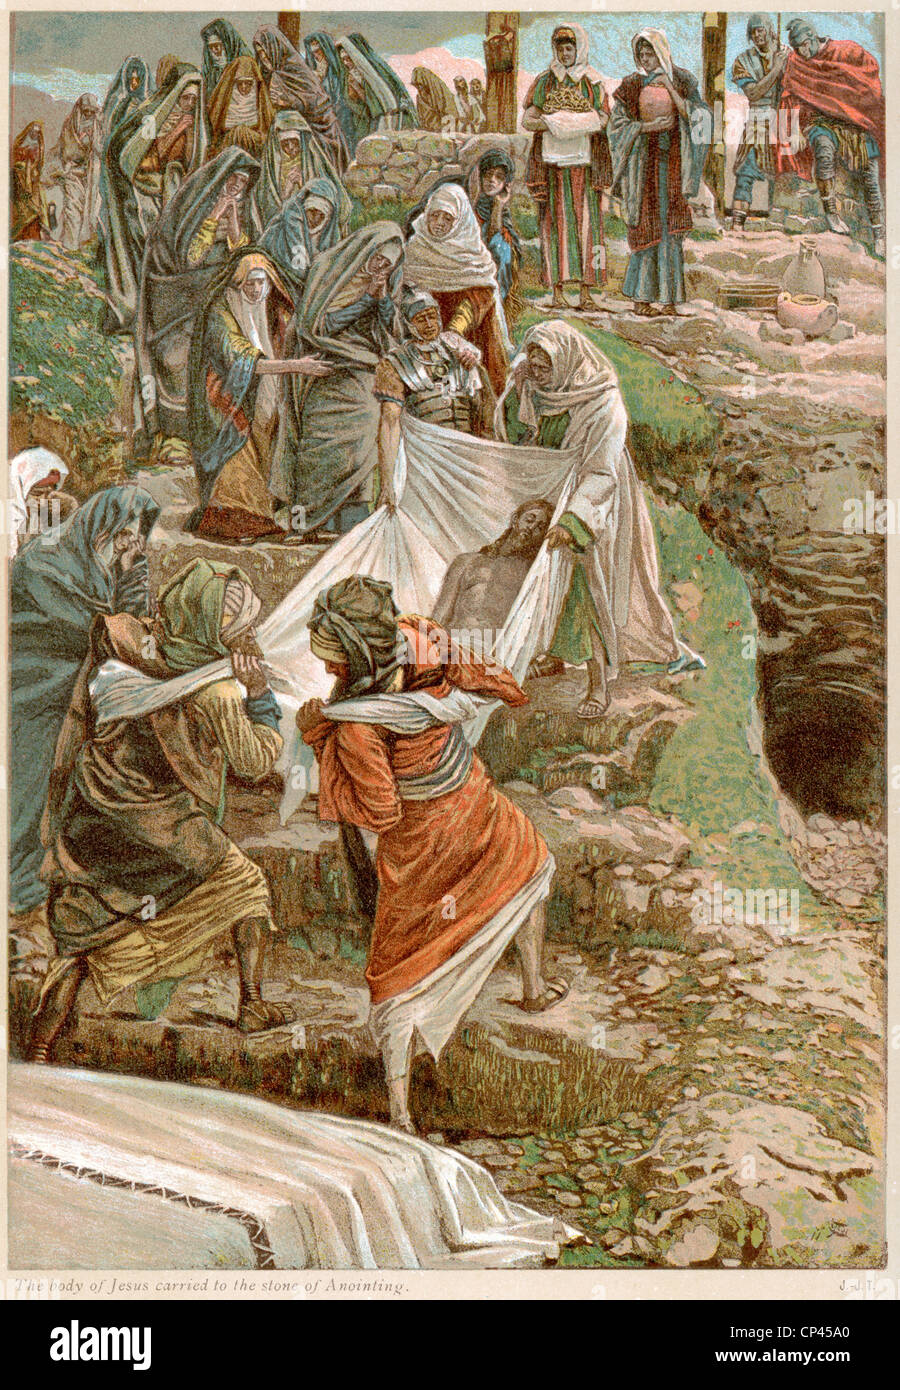 Lithograph of the body of Jesus carried to the stone of Anointing, by James Tissot Stock Photo